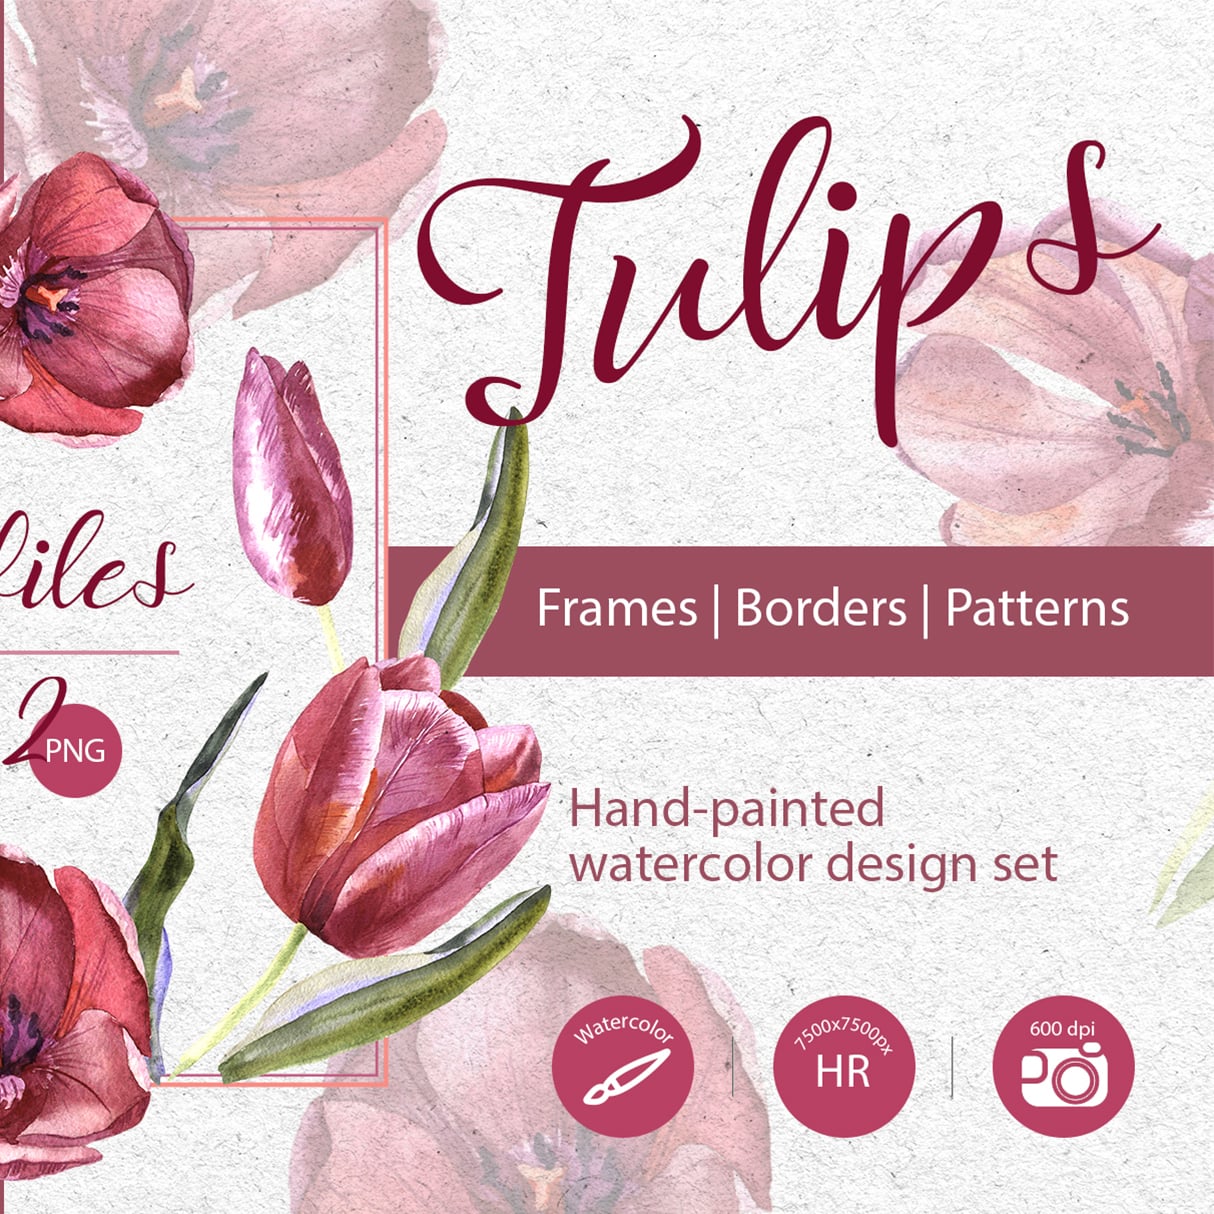 Wildflower Red Tulips PNG Watercolor Set main cover.